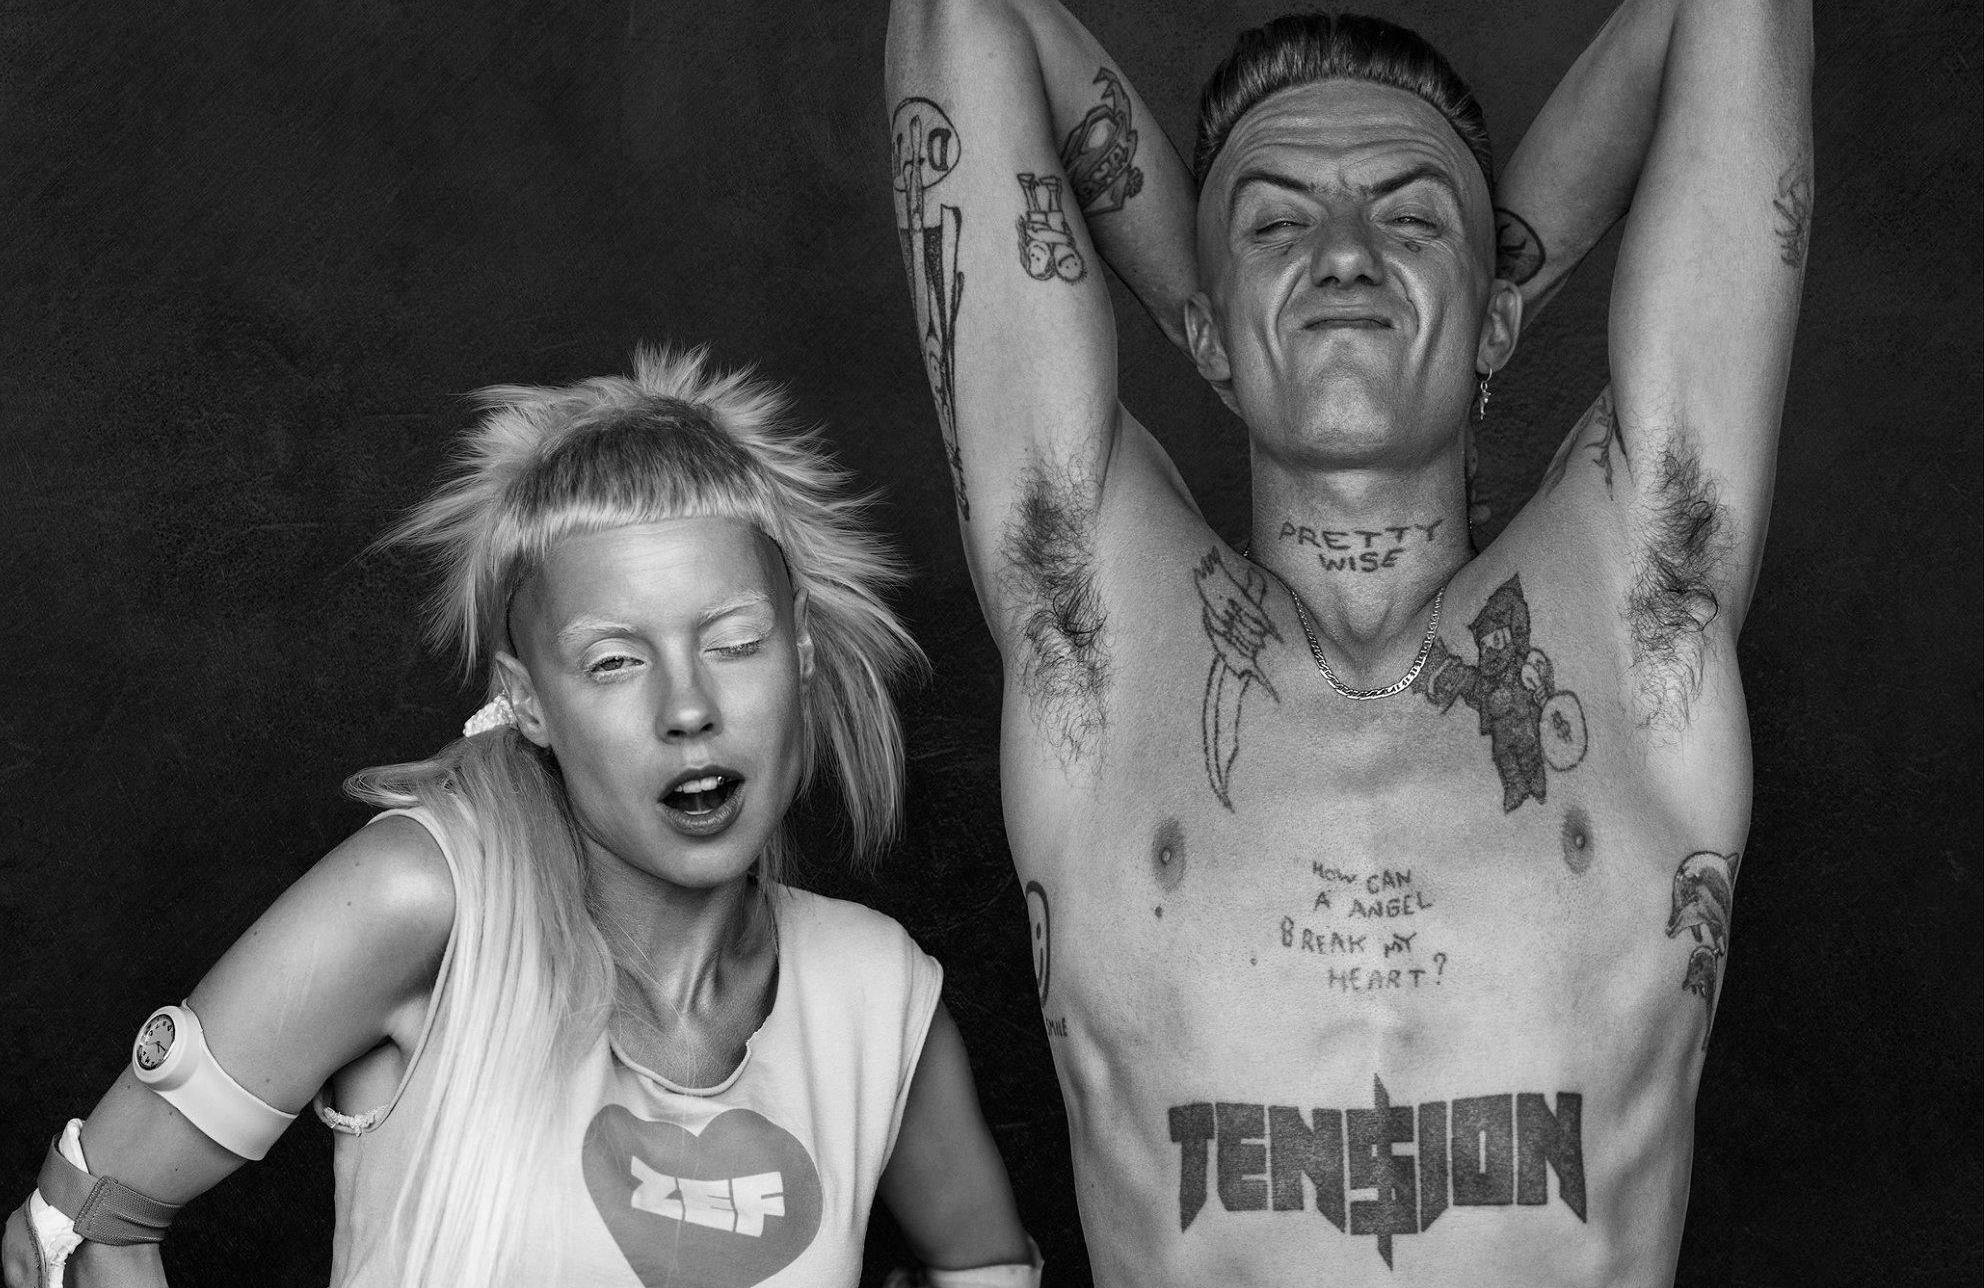 Die Antwoord accuses Suicide Squad director of ripping them off